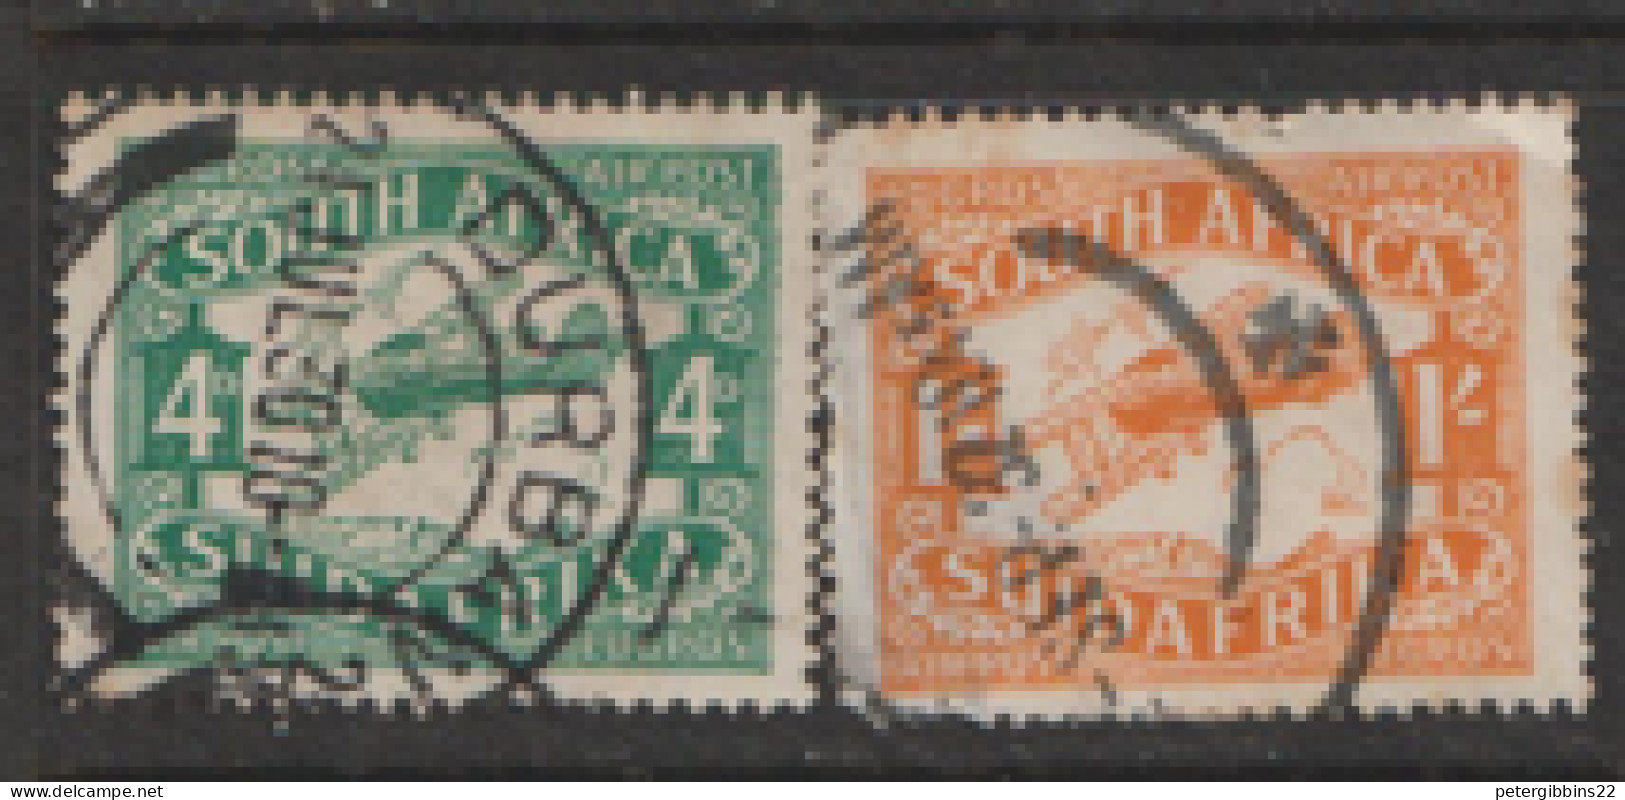 South Africa 1929  SG   40-1 Air Fine Used - Used Stamps